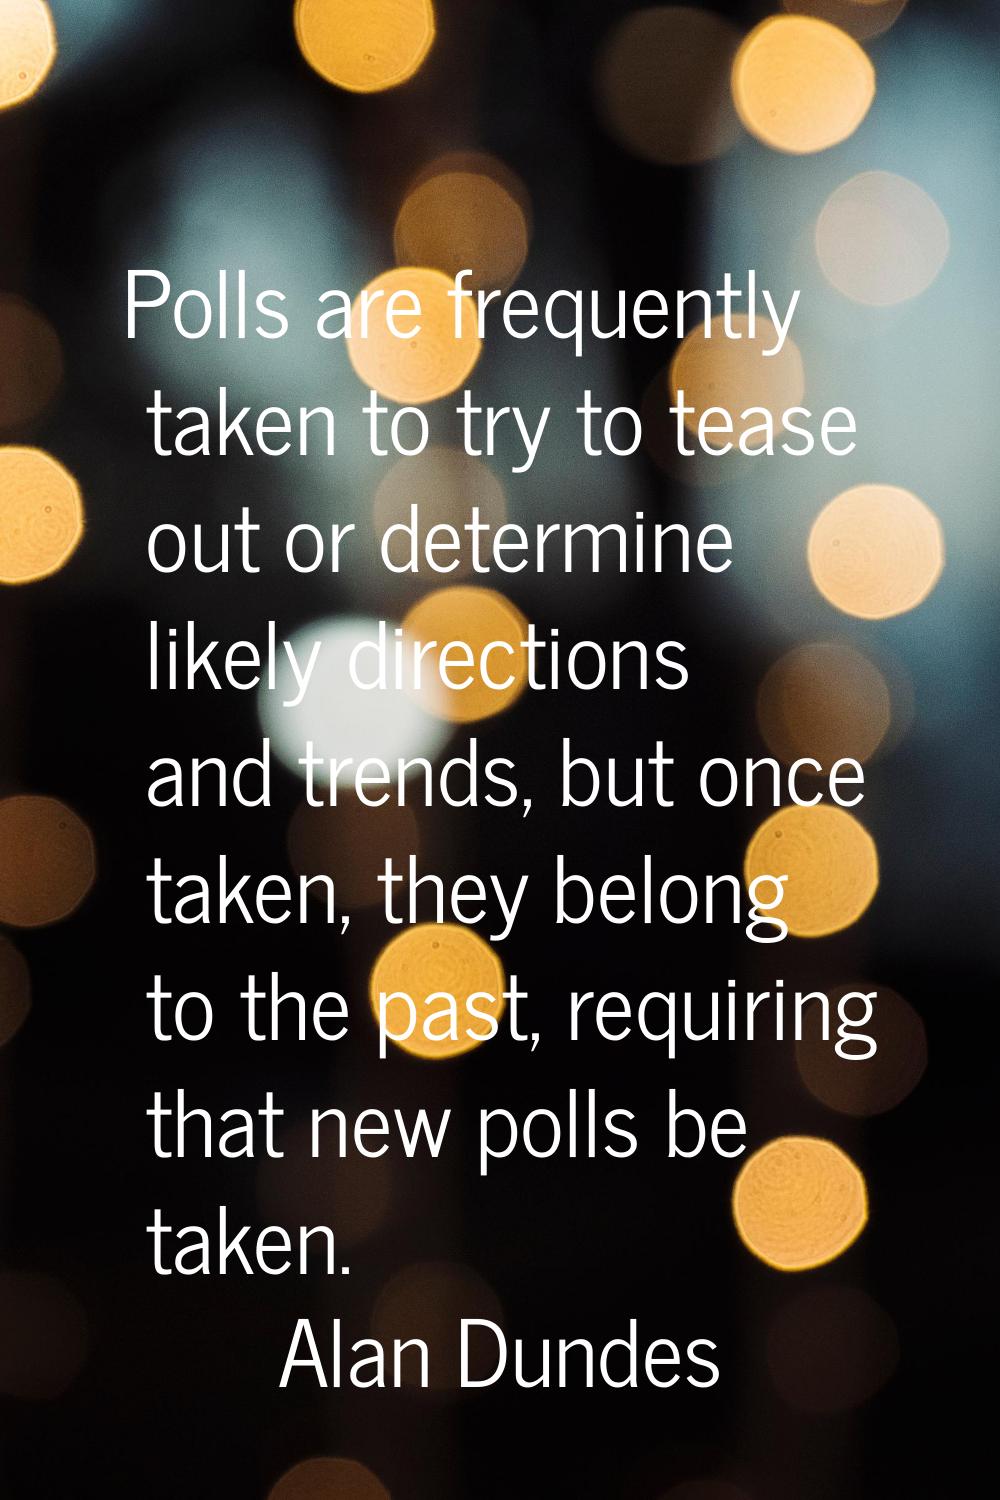 Polls are frequently taken to try to tease out or determine likely directions and trends, but once 